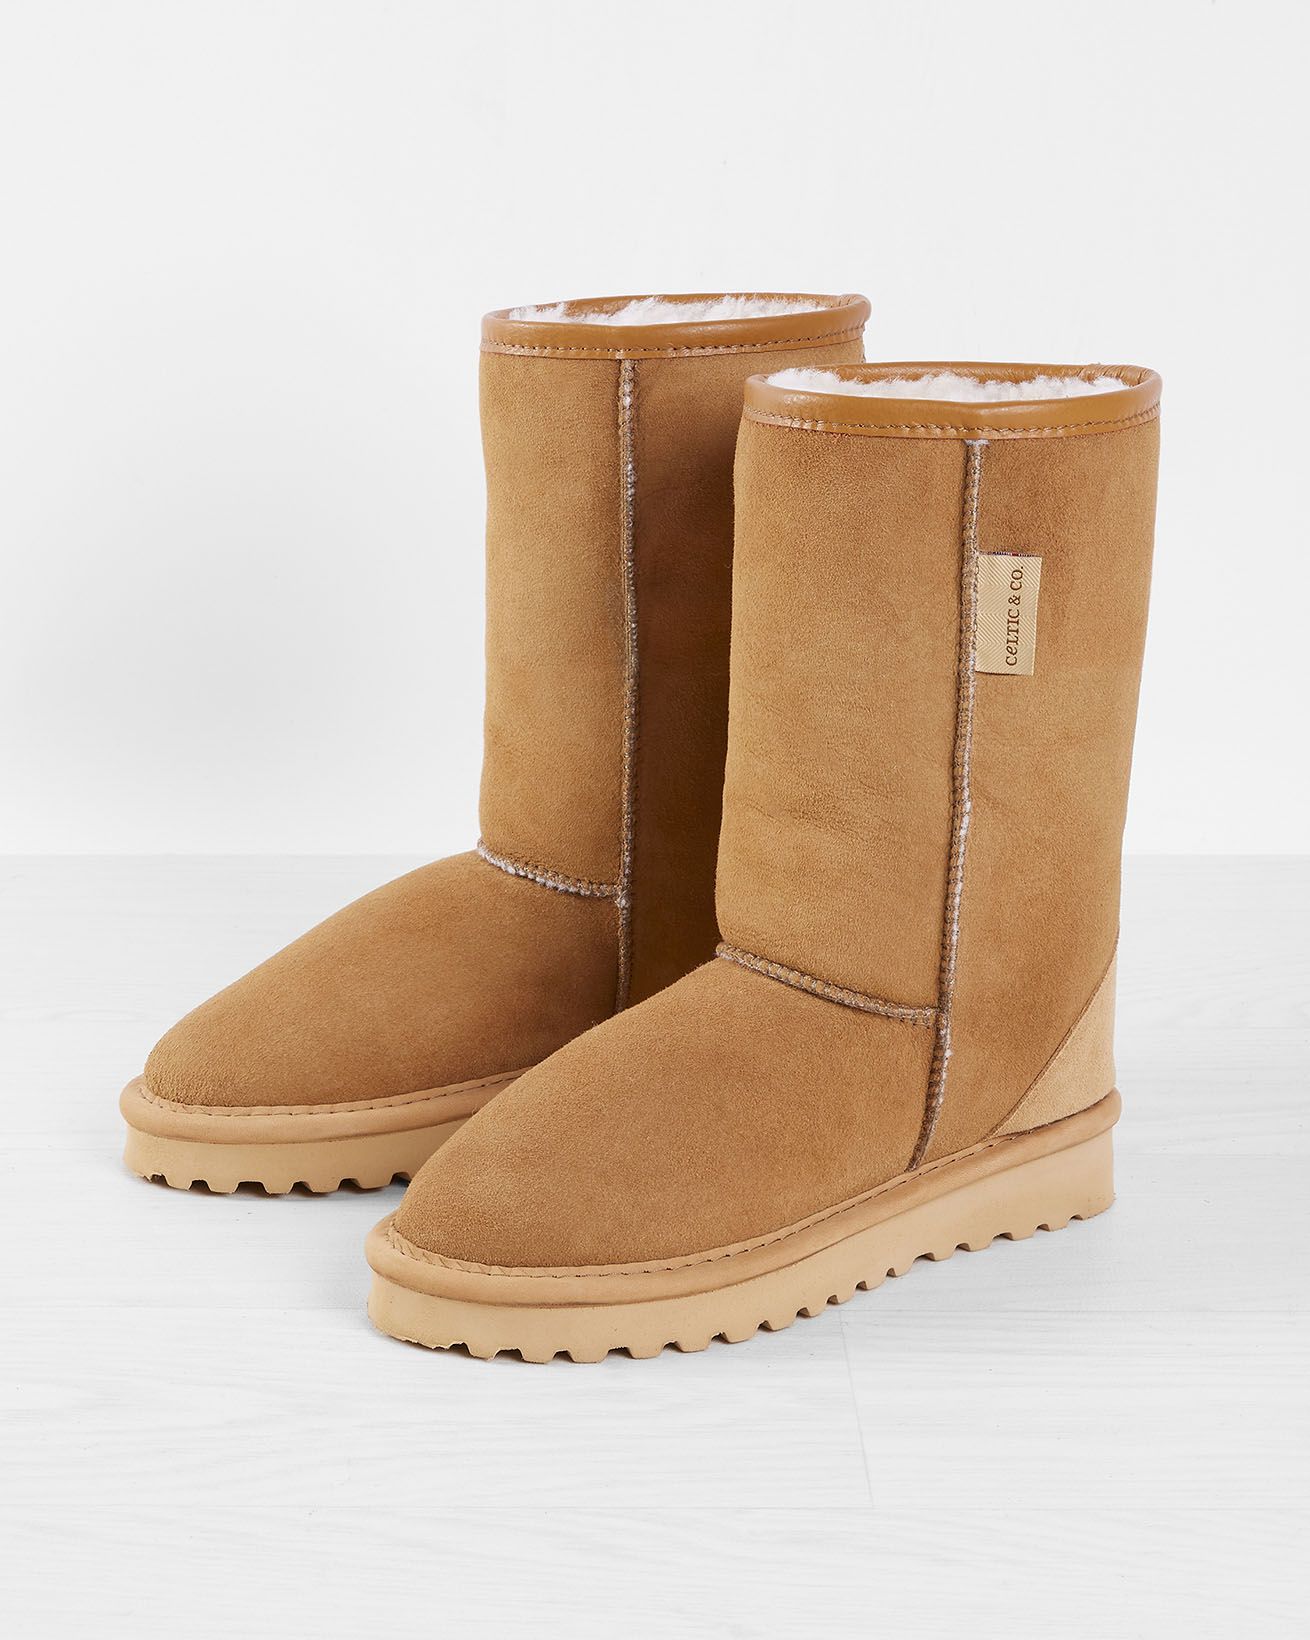 3 Alternatives To Washing Your Ugg Boots In The Washing Machine